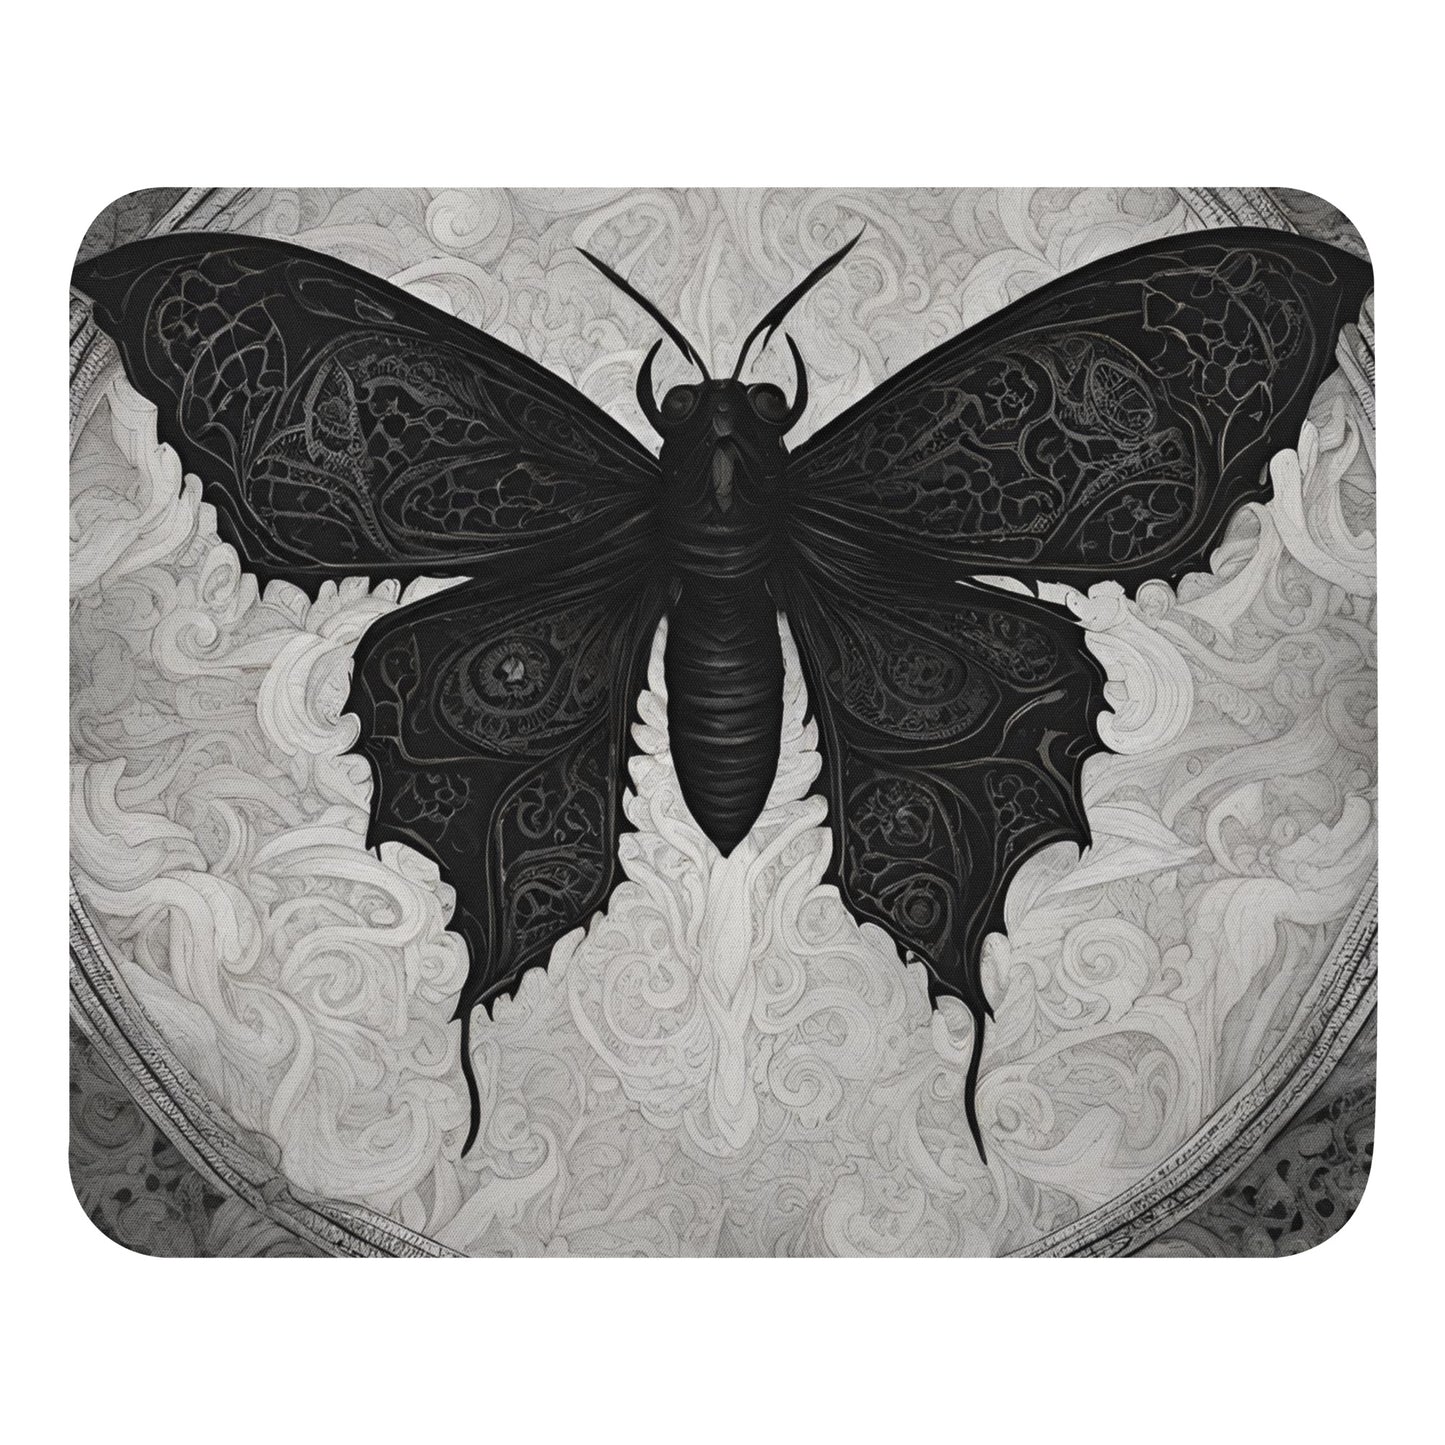 MOTH TO FLAME MOUSE PAD